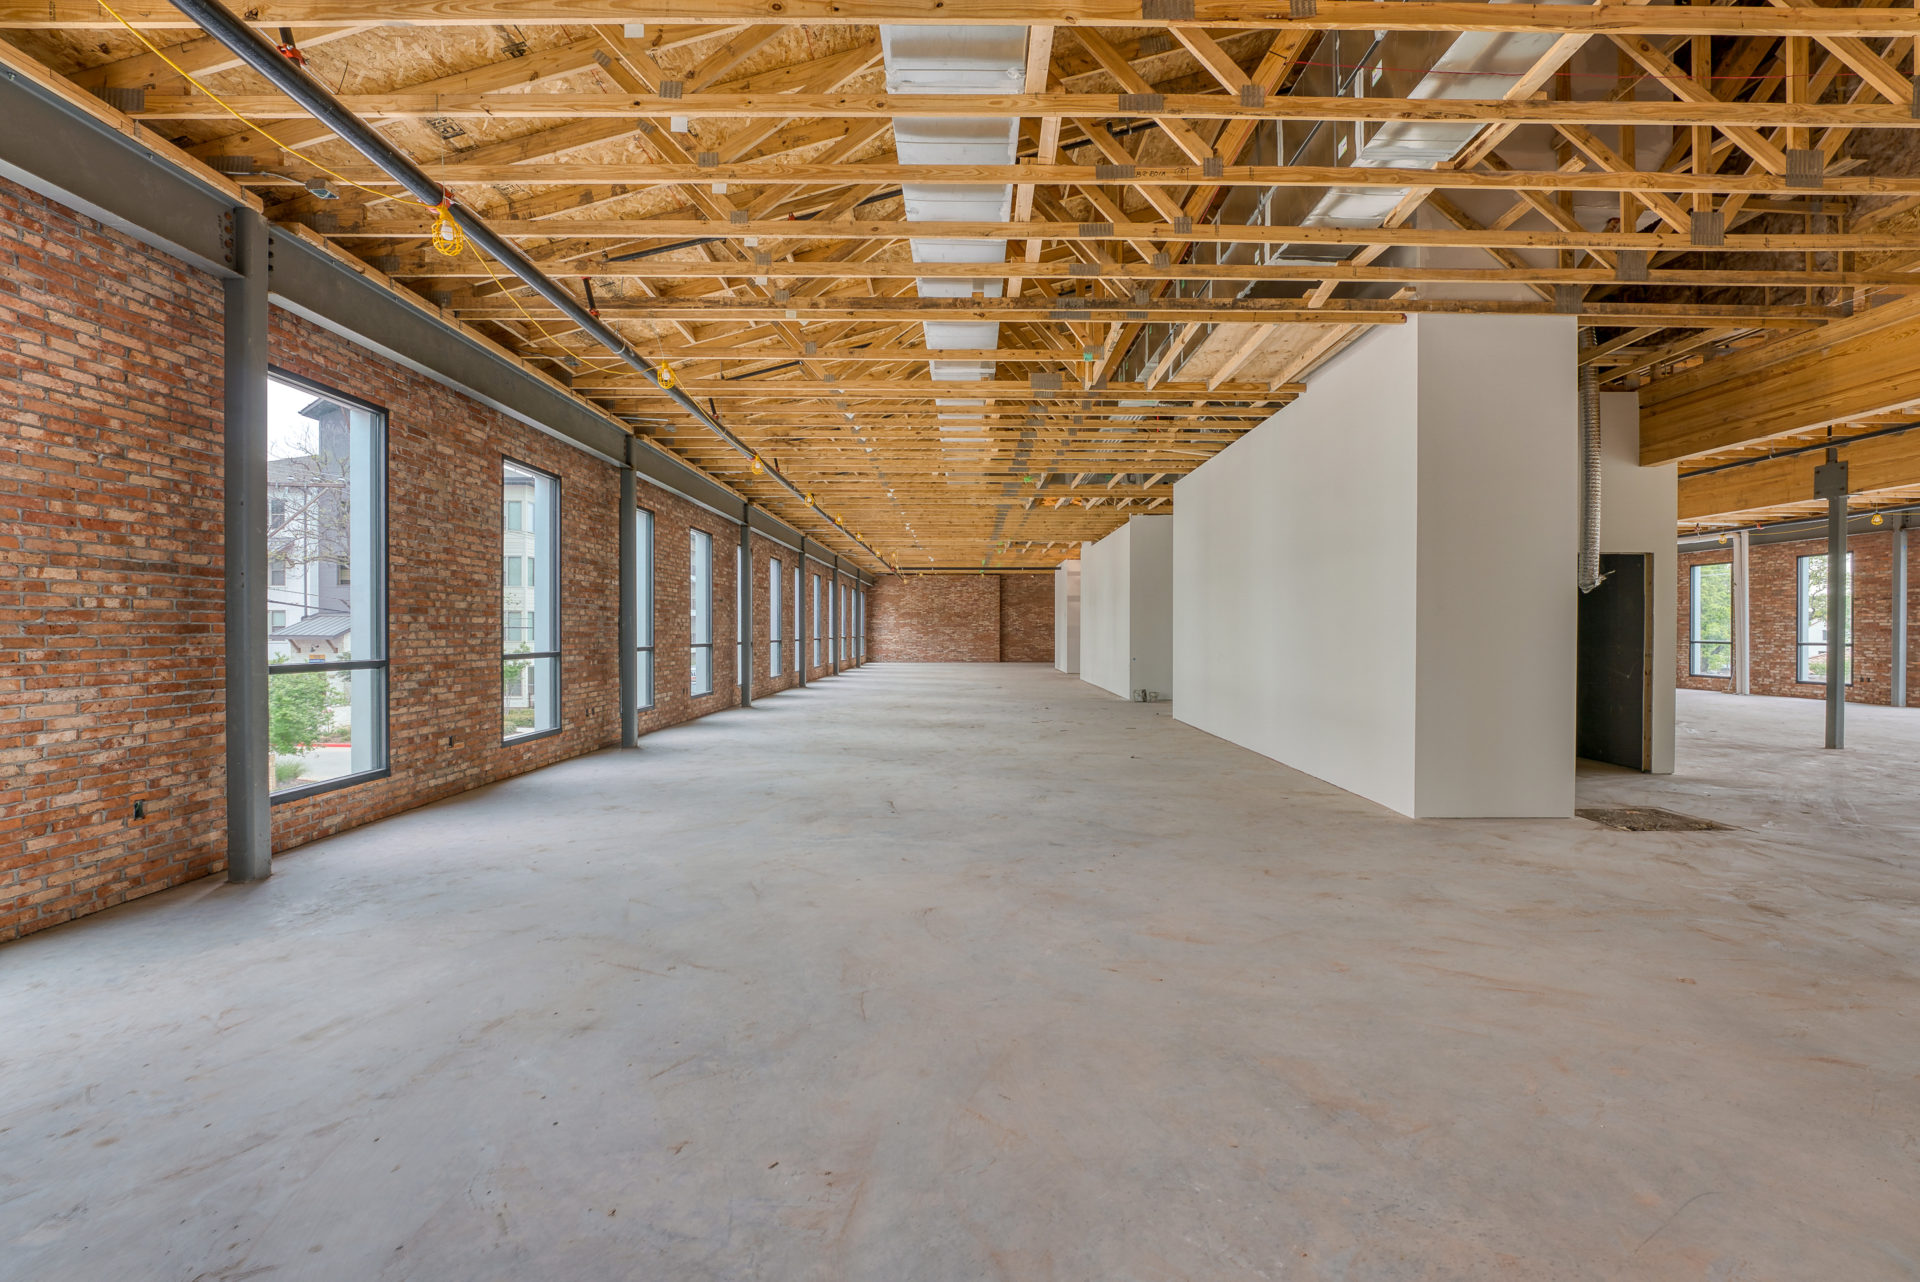 Interior view of second floor of 133 Nursery Lane with a brick wall on the right side and steel beams throughout